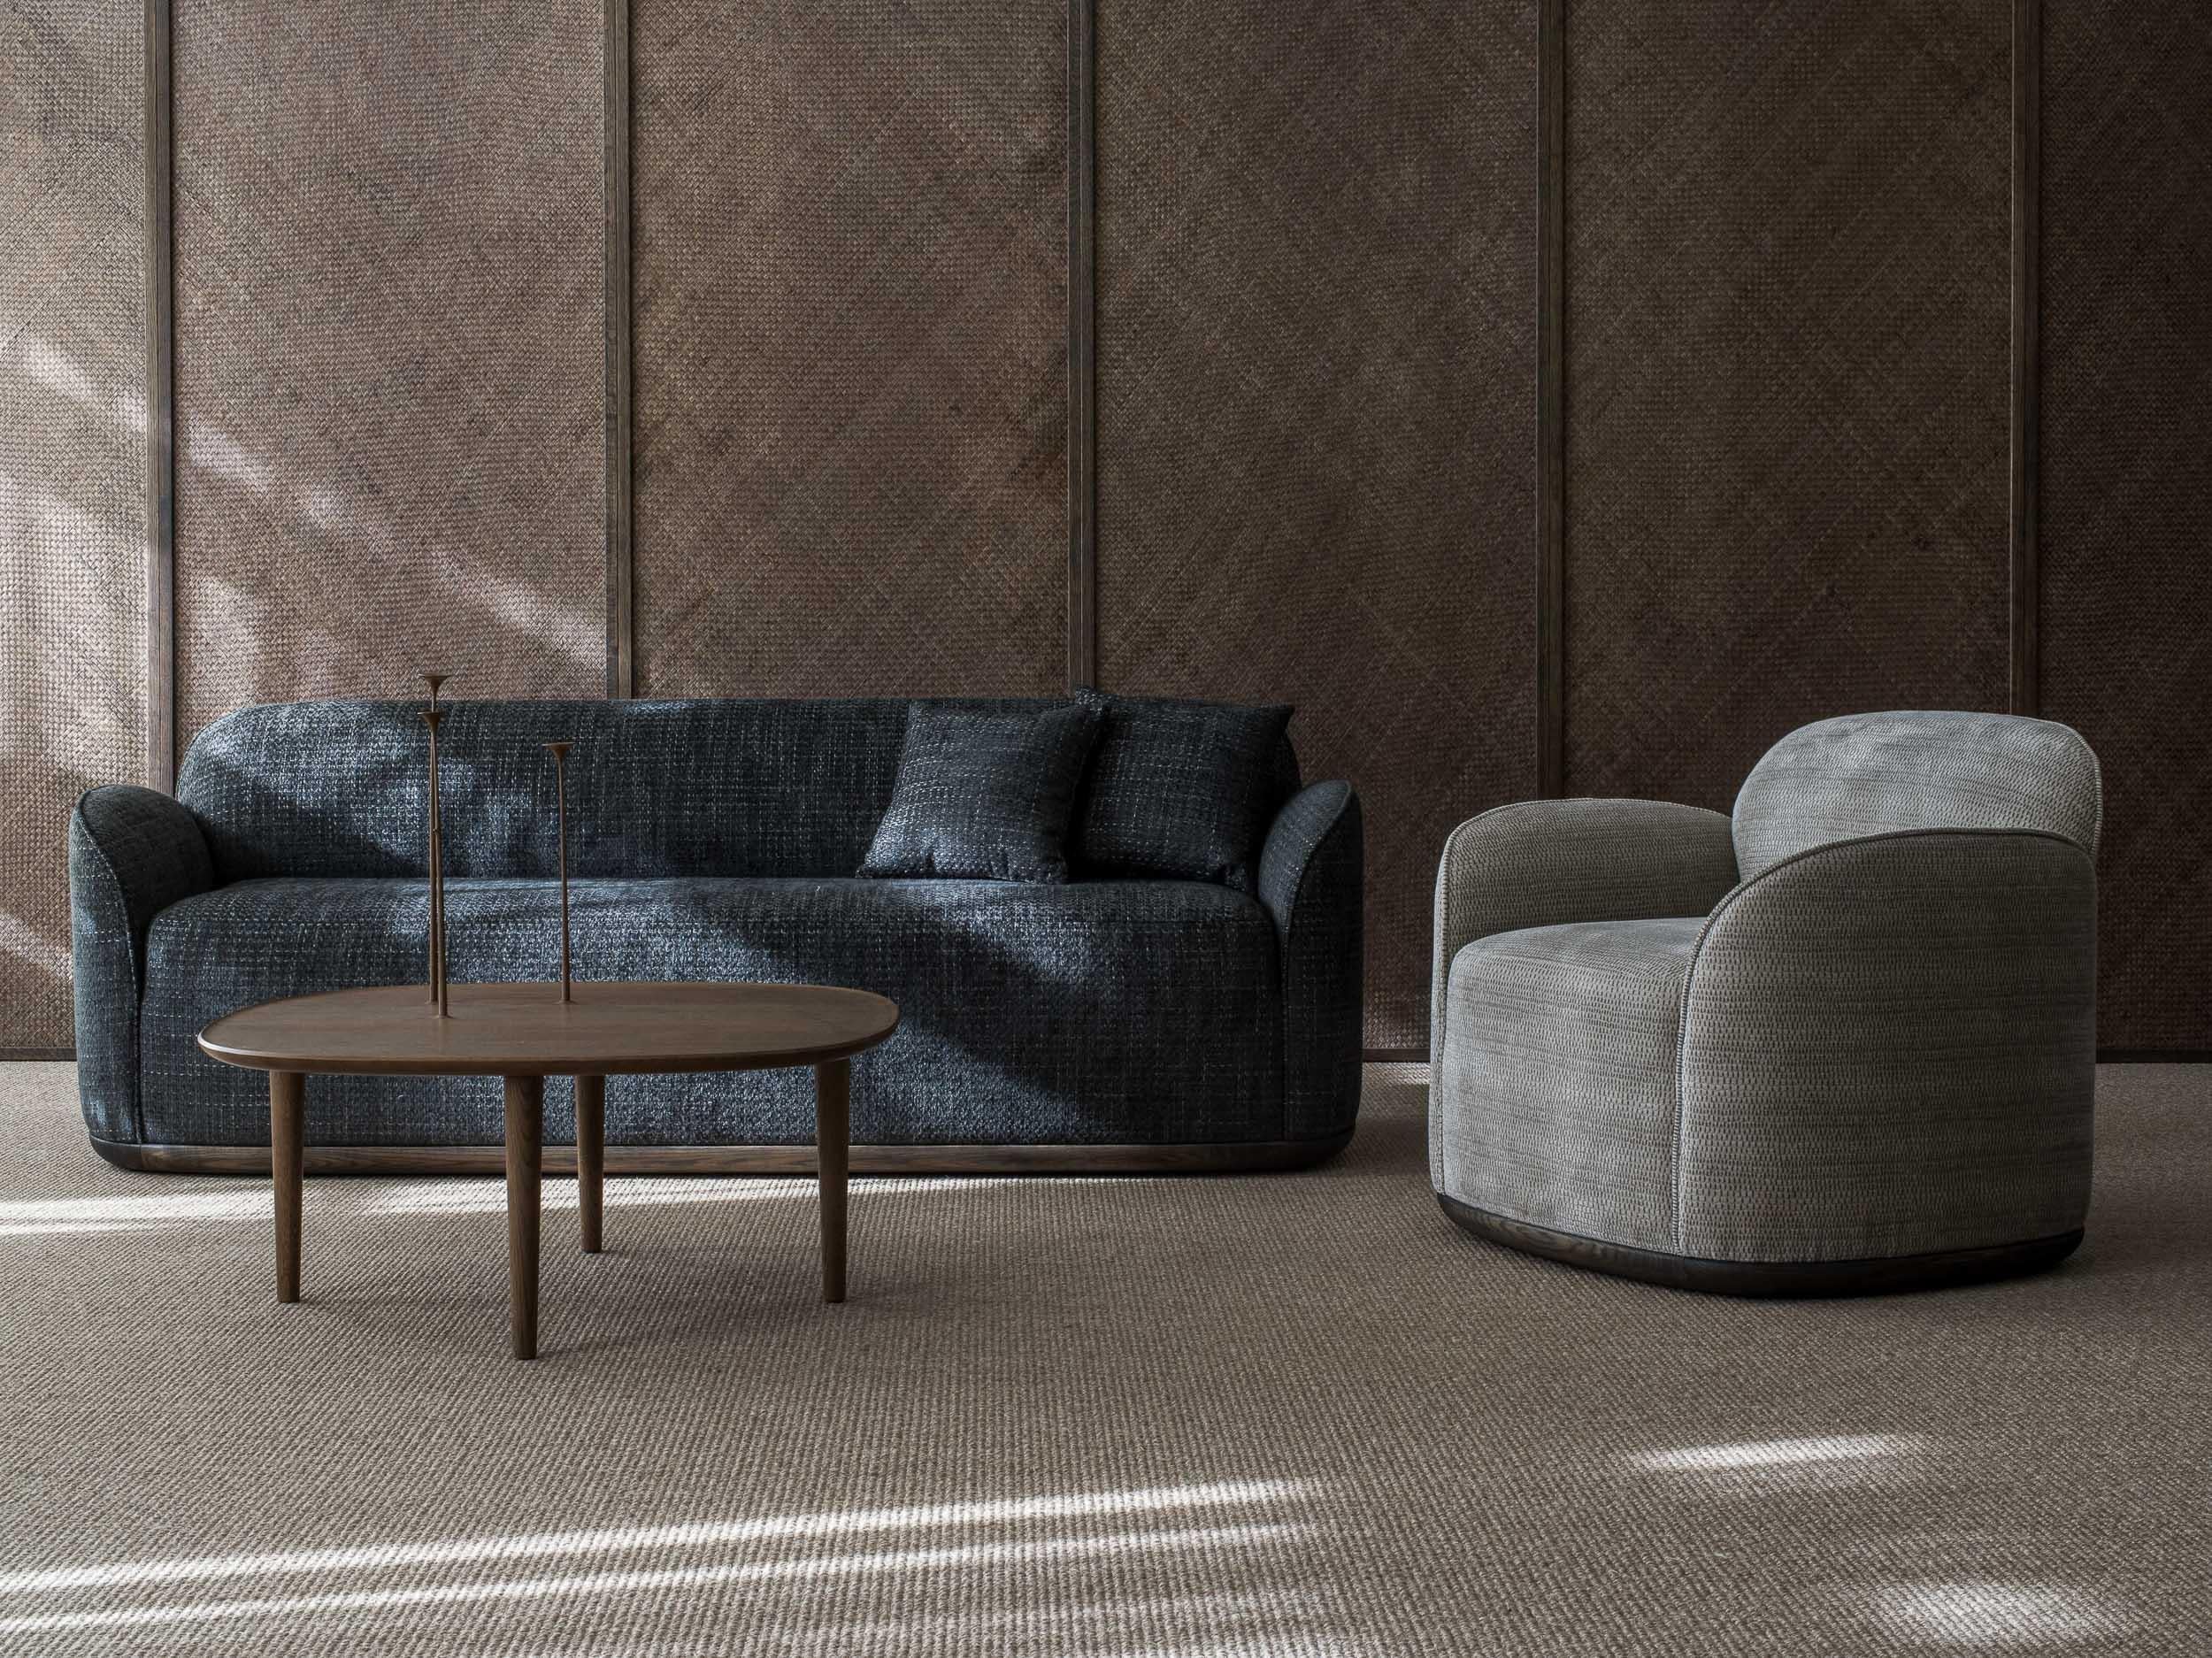 Unio Loveseat by Poiat 
Designers: Timo Mikkonen & Antti Rouhunkoski 

Collection UNIO 2021

Dimensions: H. 72 x W. 150 D. 72 SH. 40
Model shown: Cat 4. Pergamena 017 - Dedar
 
The Unio Collection, featuring an armchair and sofas, opens a